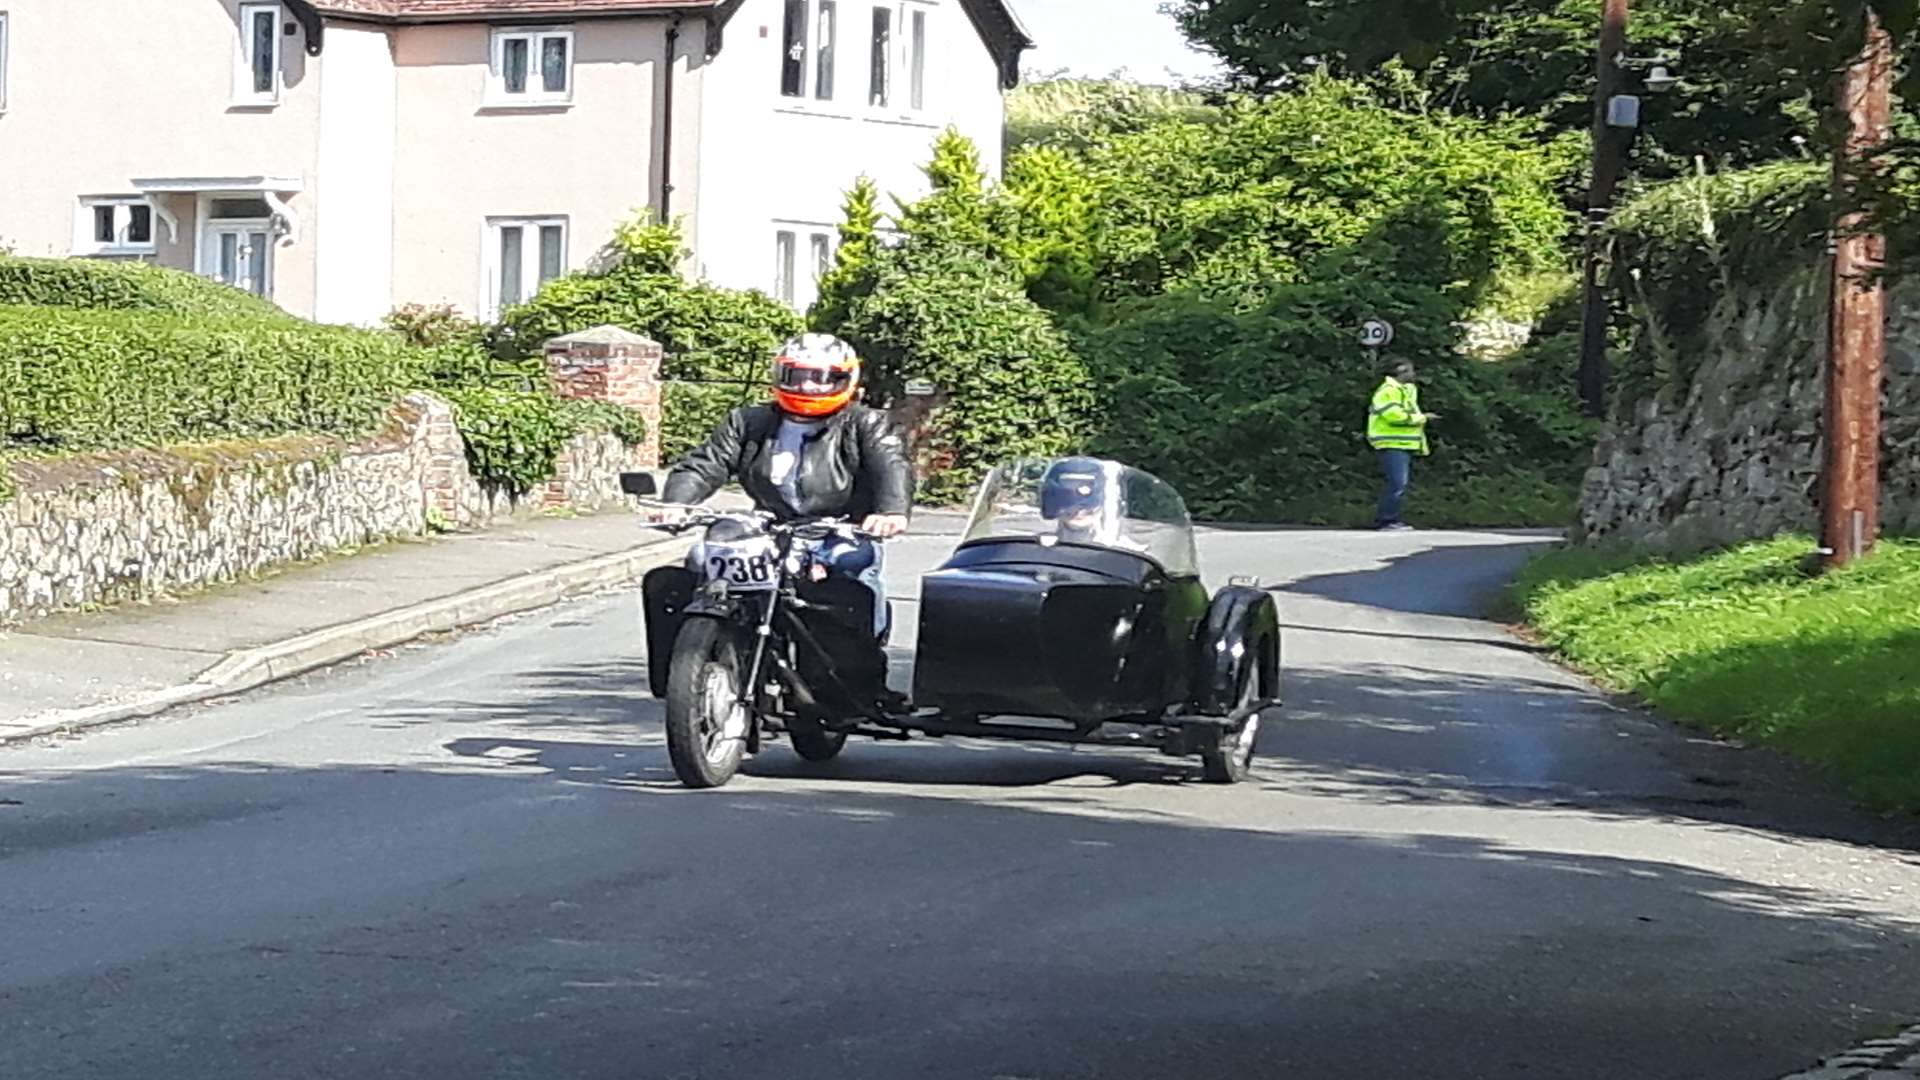 A motorbike and sidecar spotted heading through Birling at this year's International West Kent Run